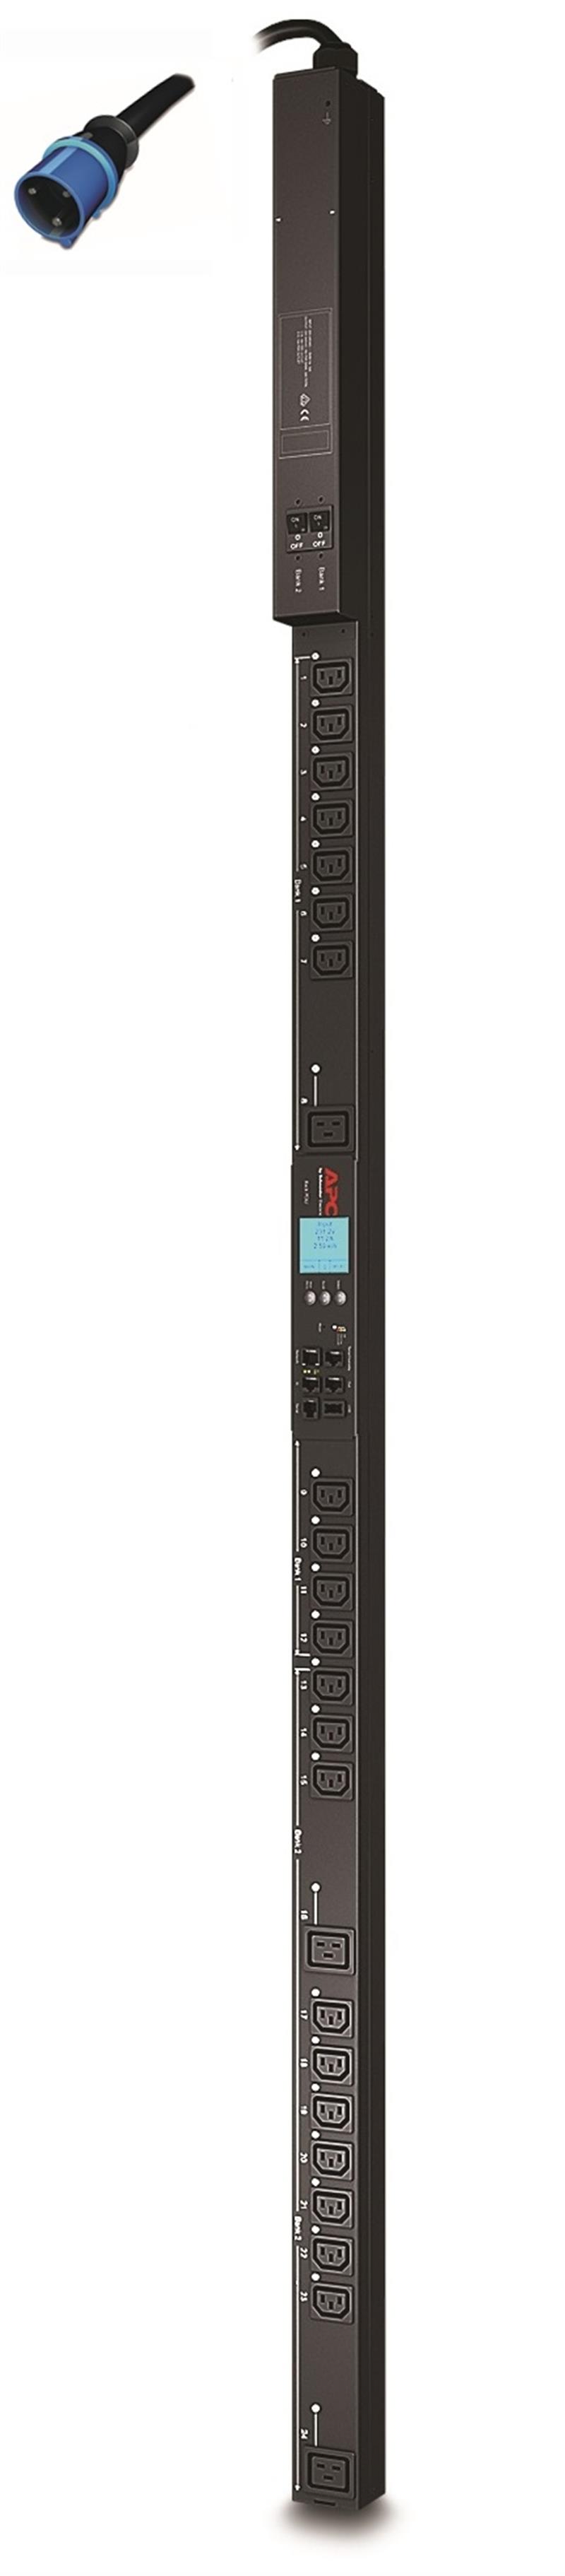 APC Rack PDU, Metered-by-Outlet with Switching, ZeroU, 32A, 230V, (21x) C13 & (3x) C19, IEC 309 32A stekker